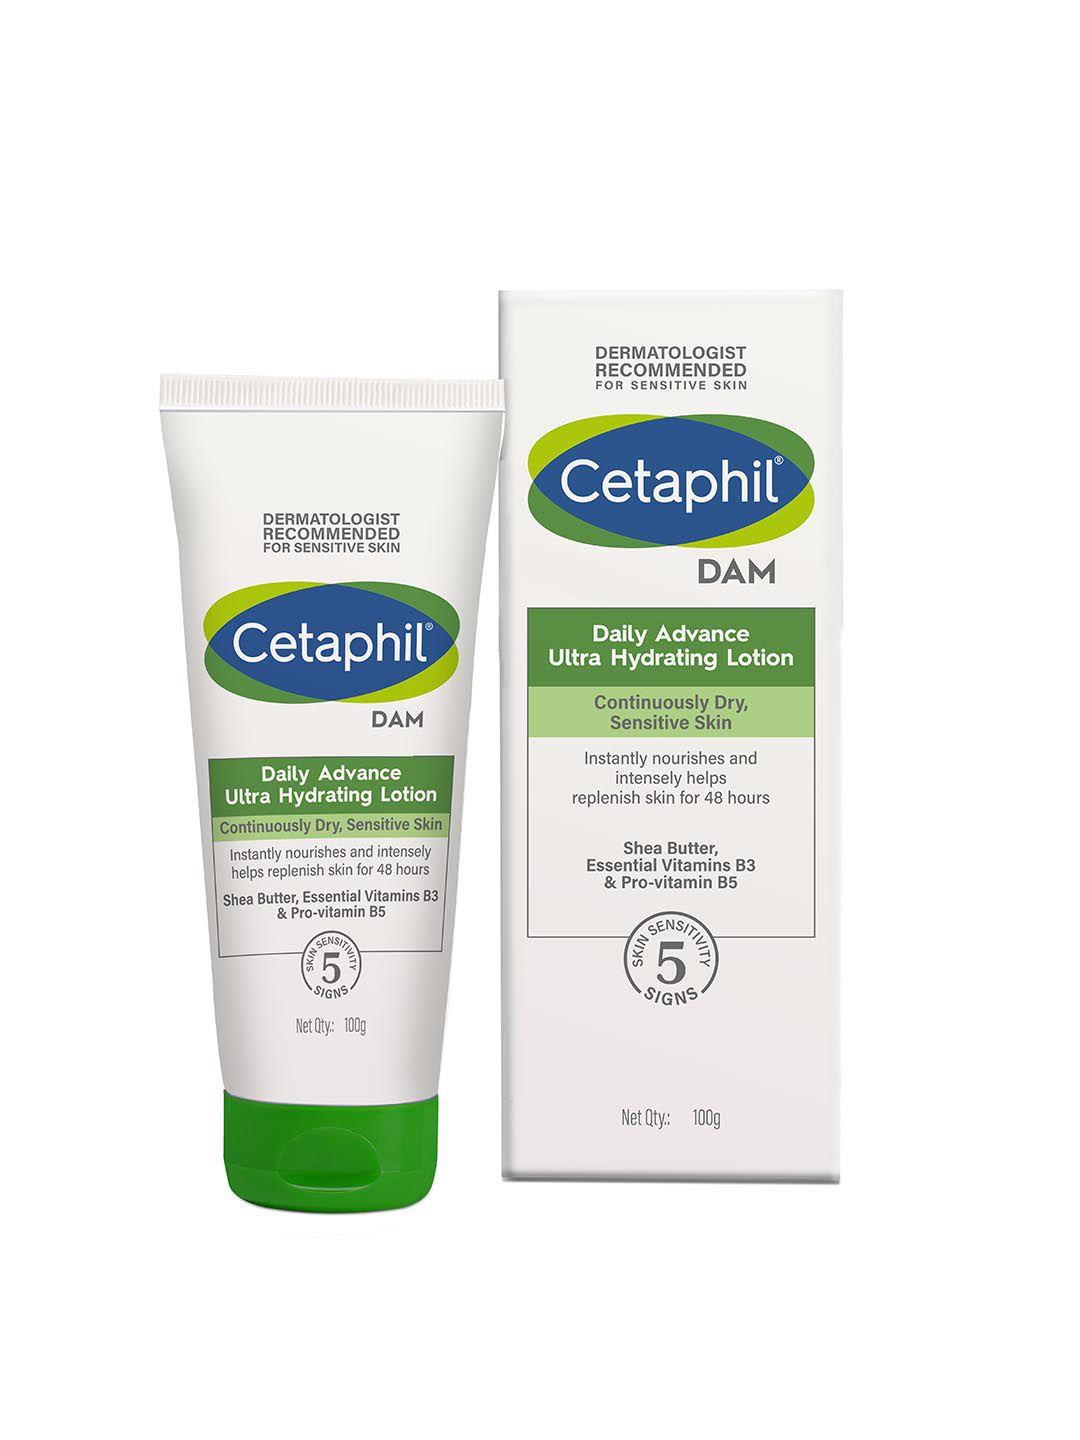 Cetaphil DAM Daily Advance Ultra Hydrating Lotion for Dry Sensitive Skin - 100g